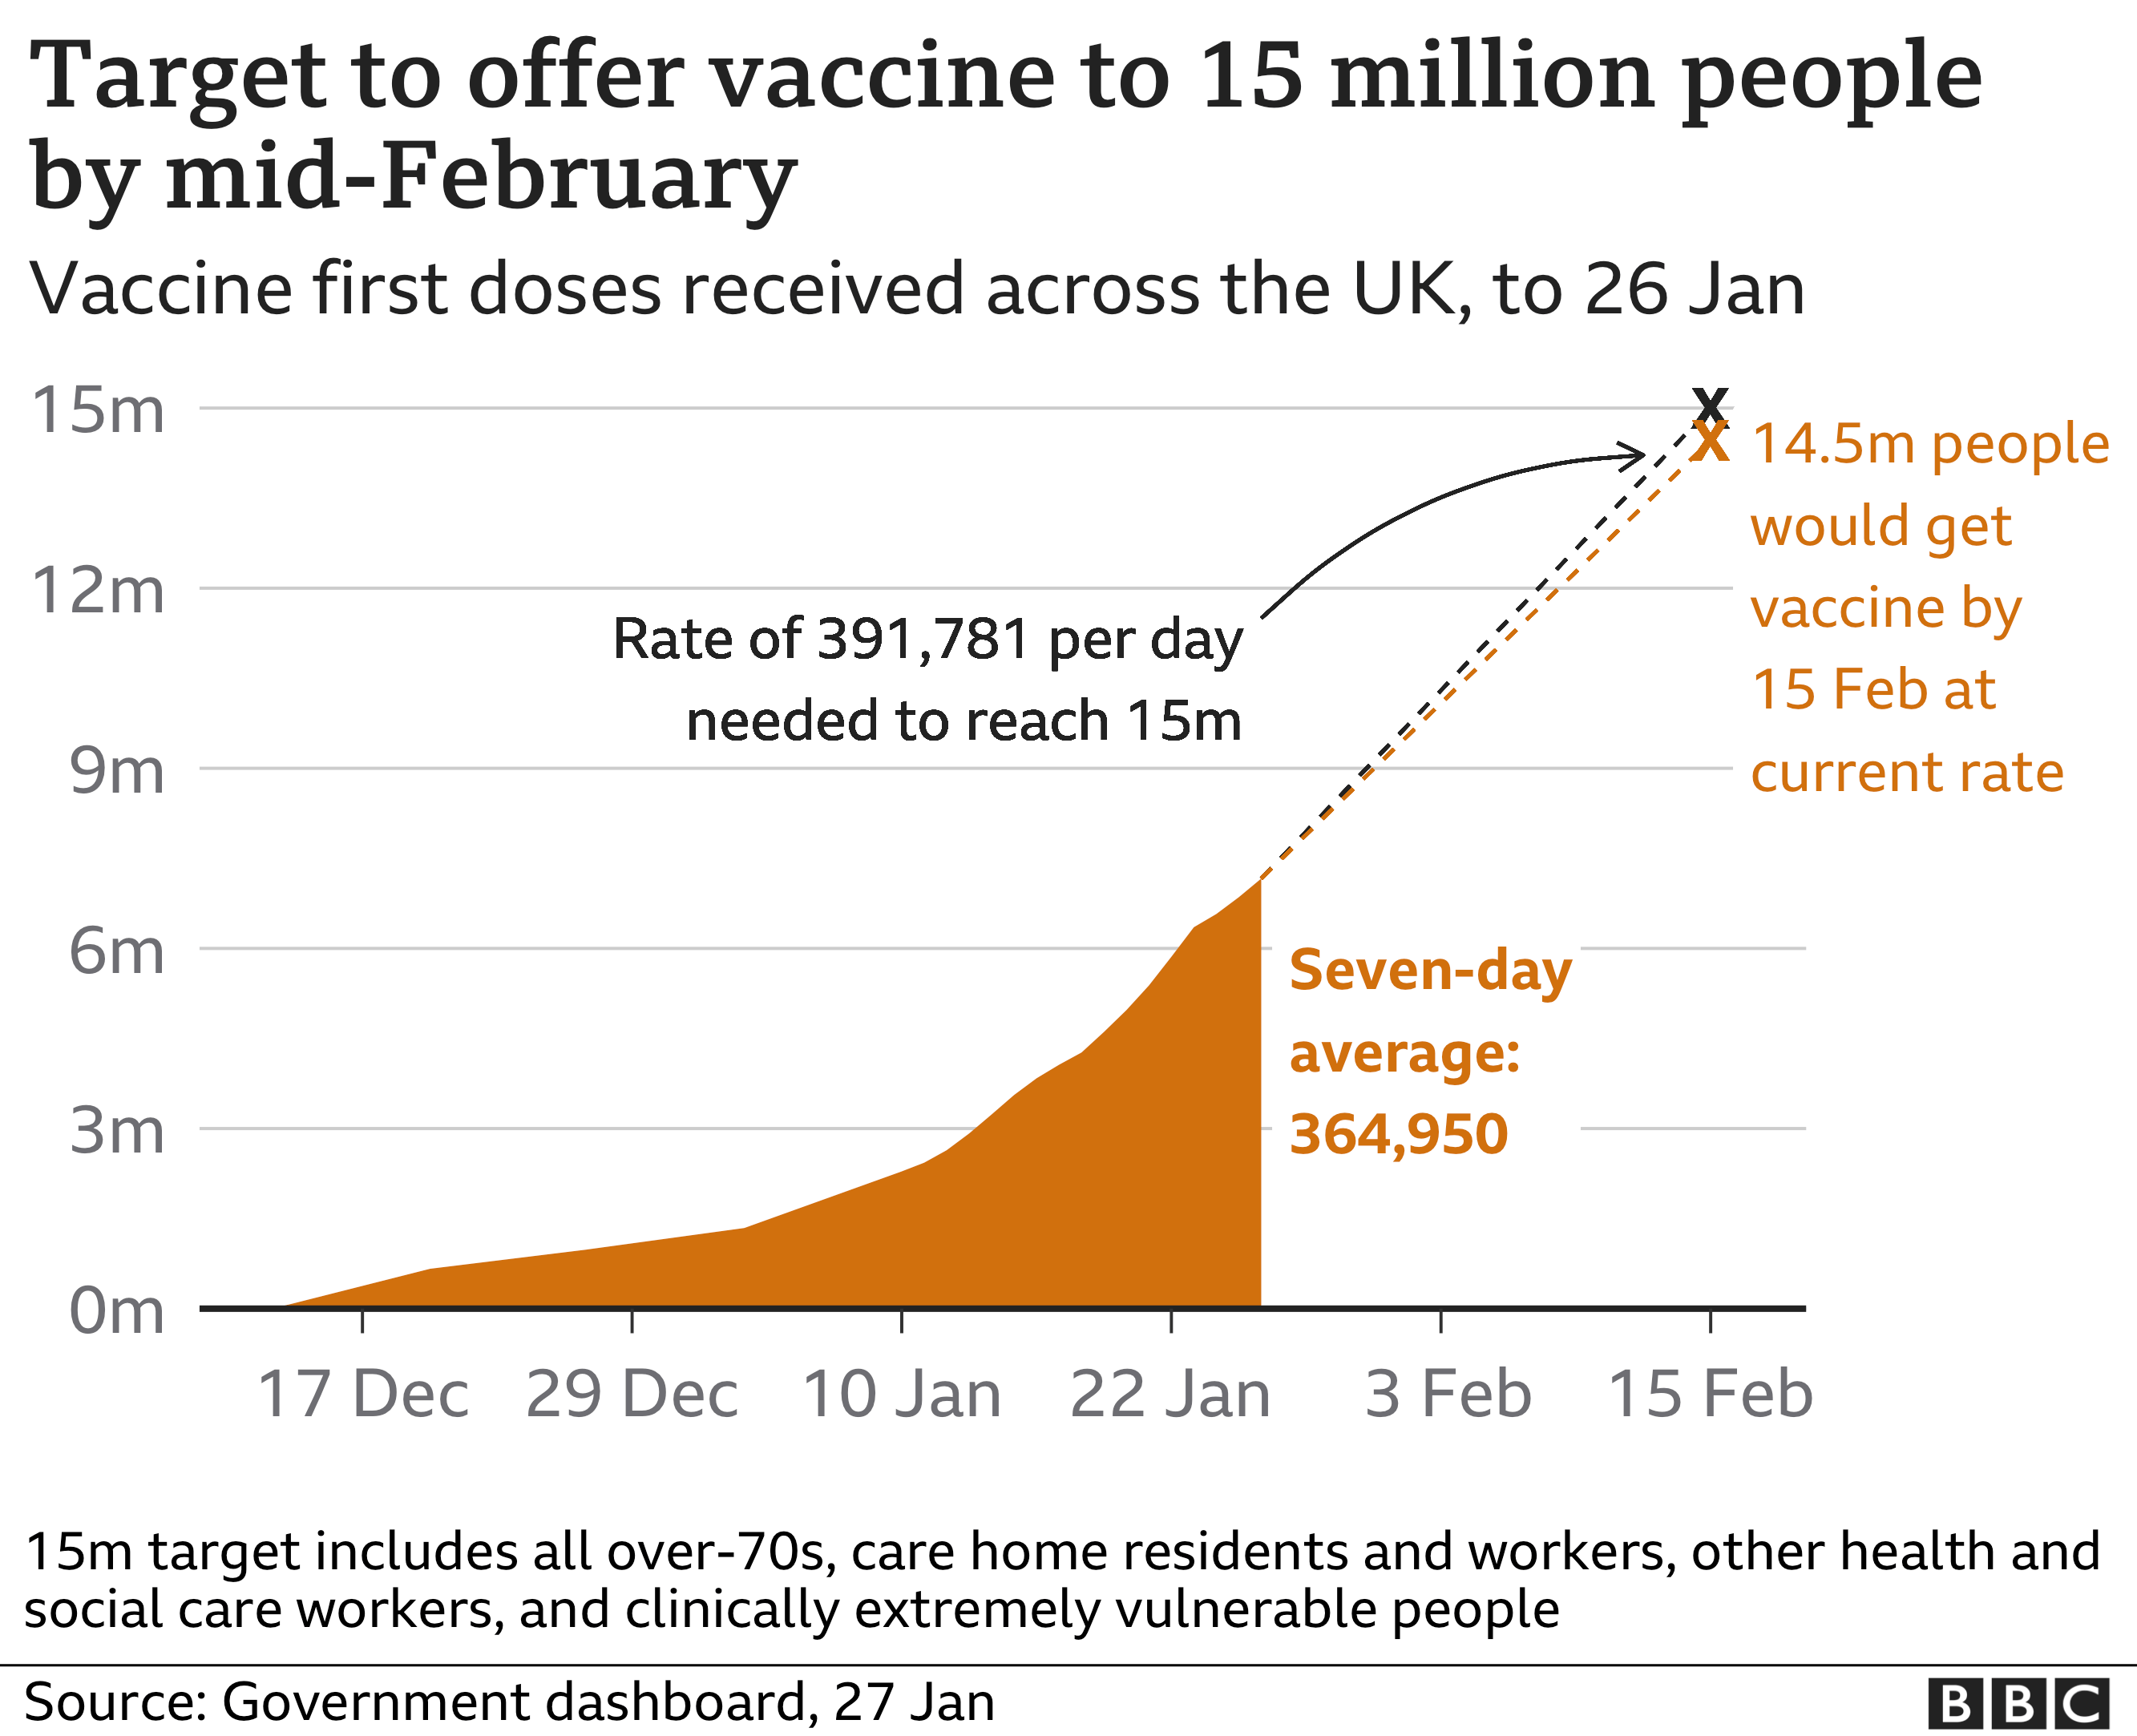 Chart showing vaccination target data